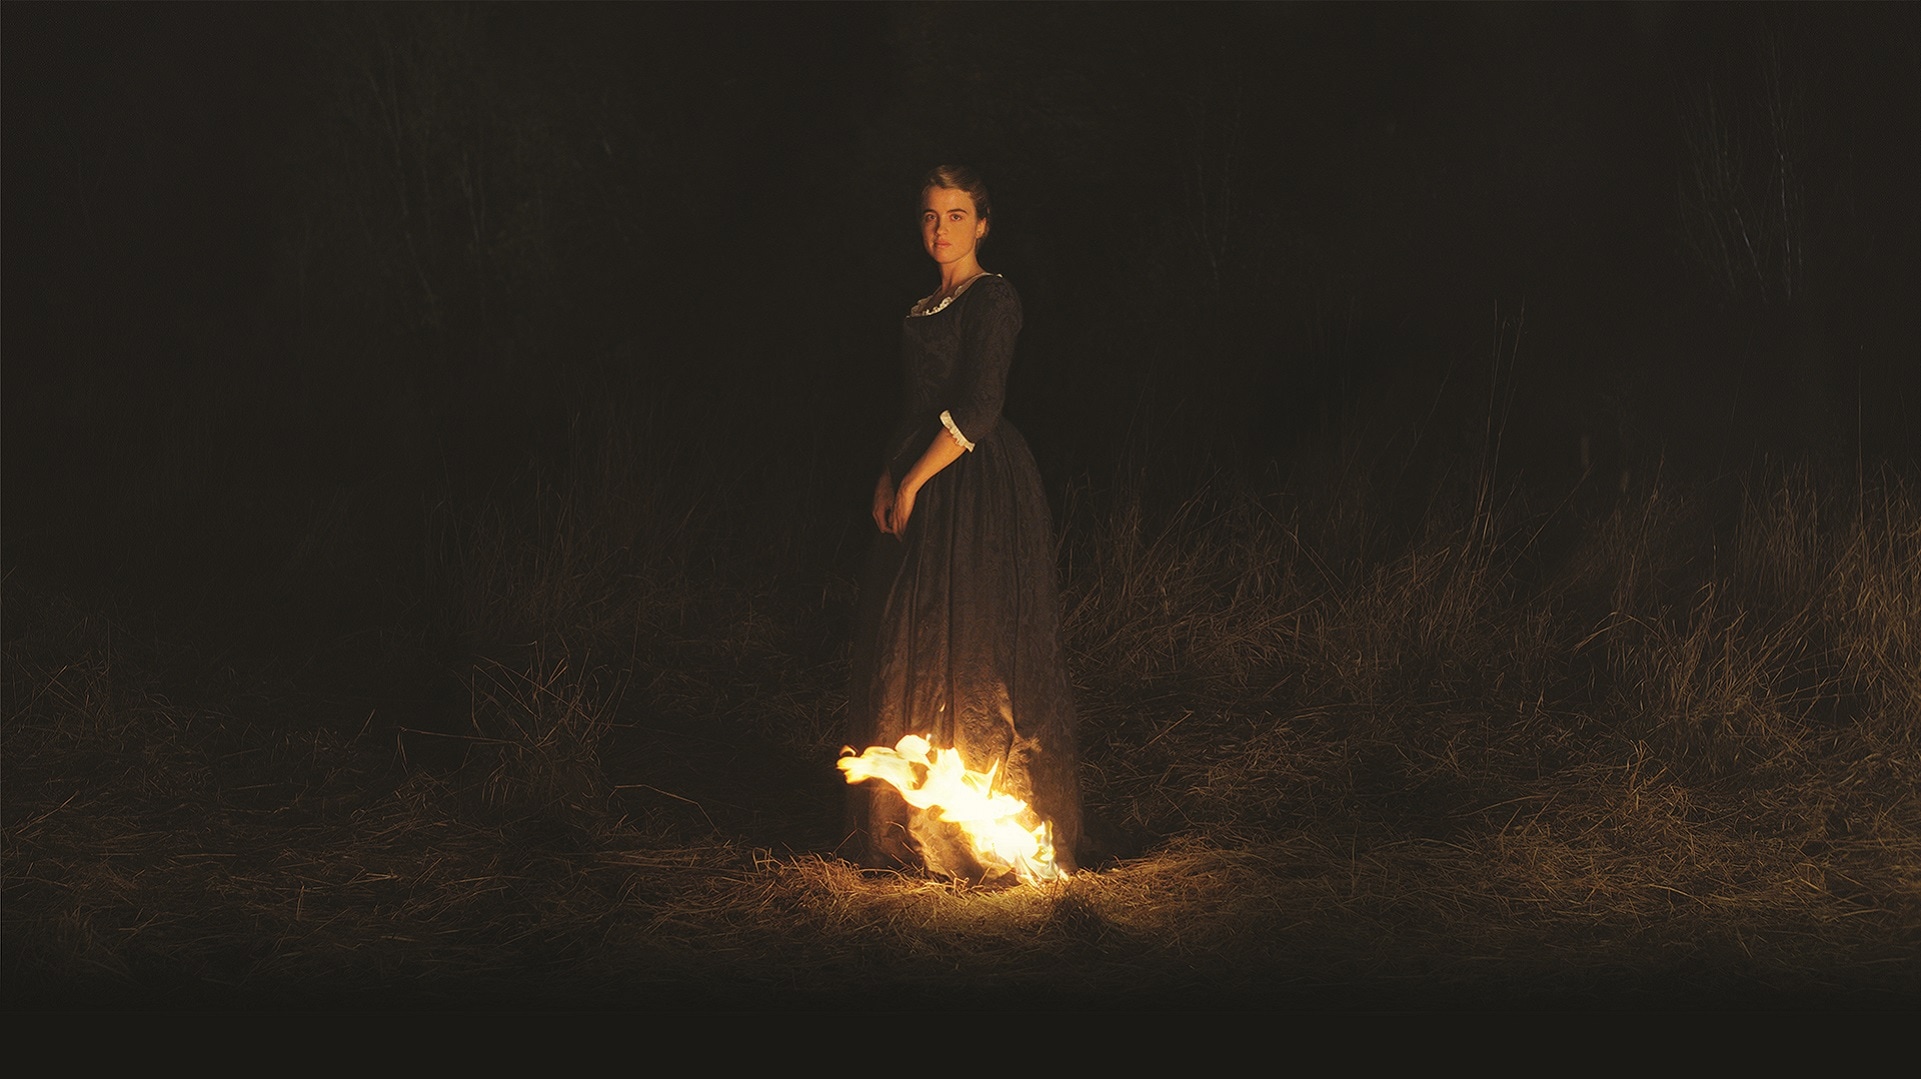 Image is from the film 'Portrait of a Lady on Fire' (2019). In almost complete darkness, a woman stands in the centre of the frame. The bottom on her dress is on fire.